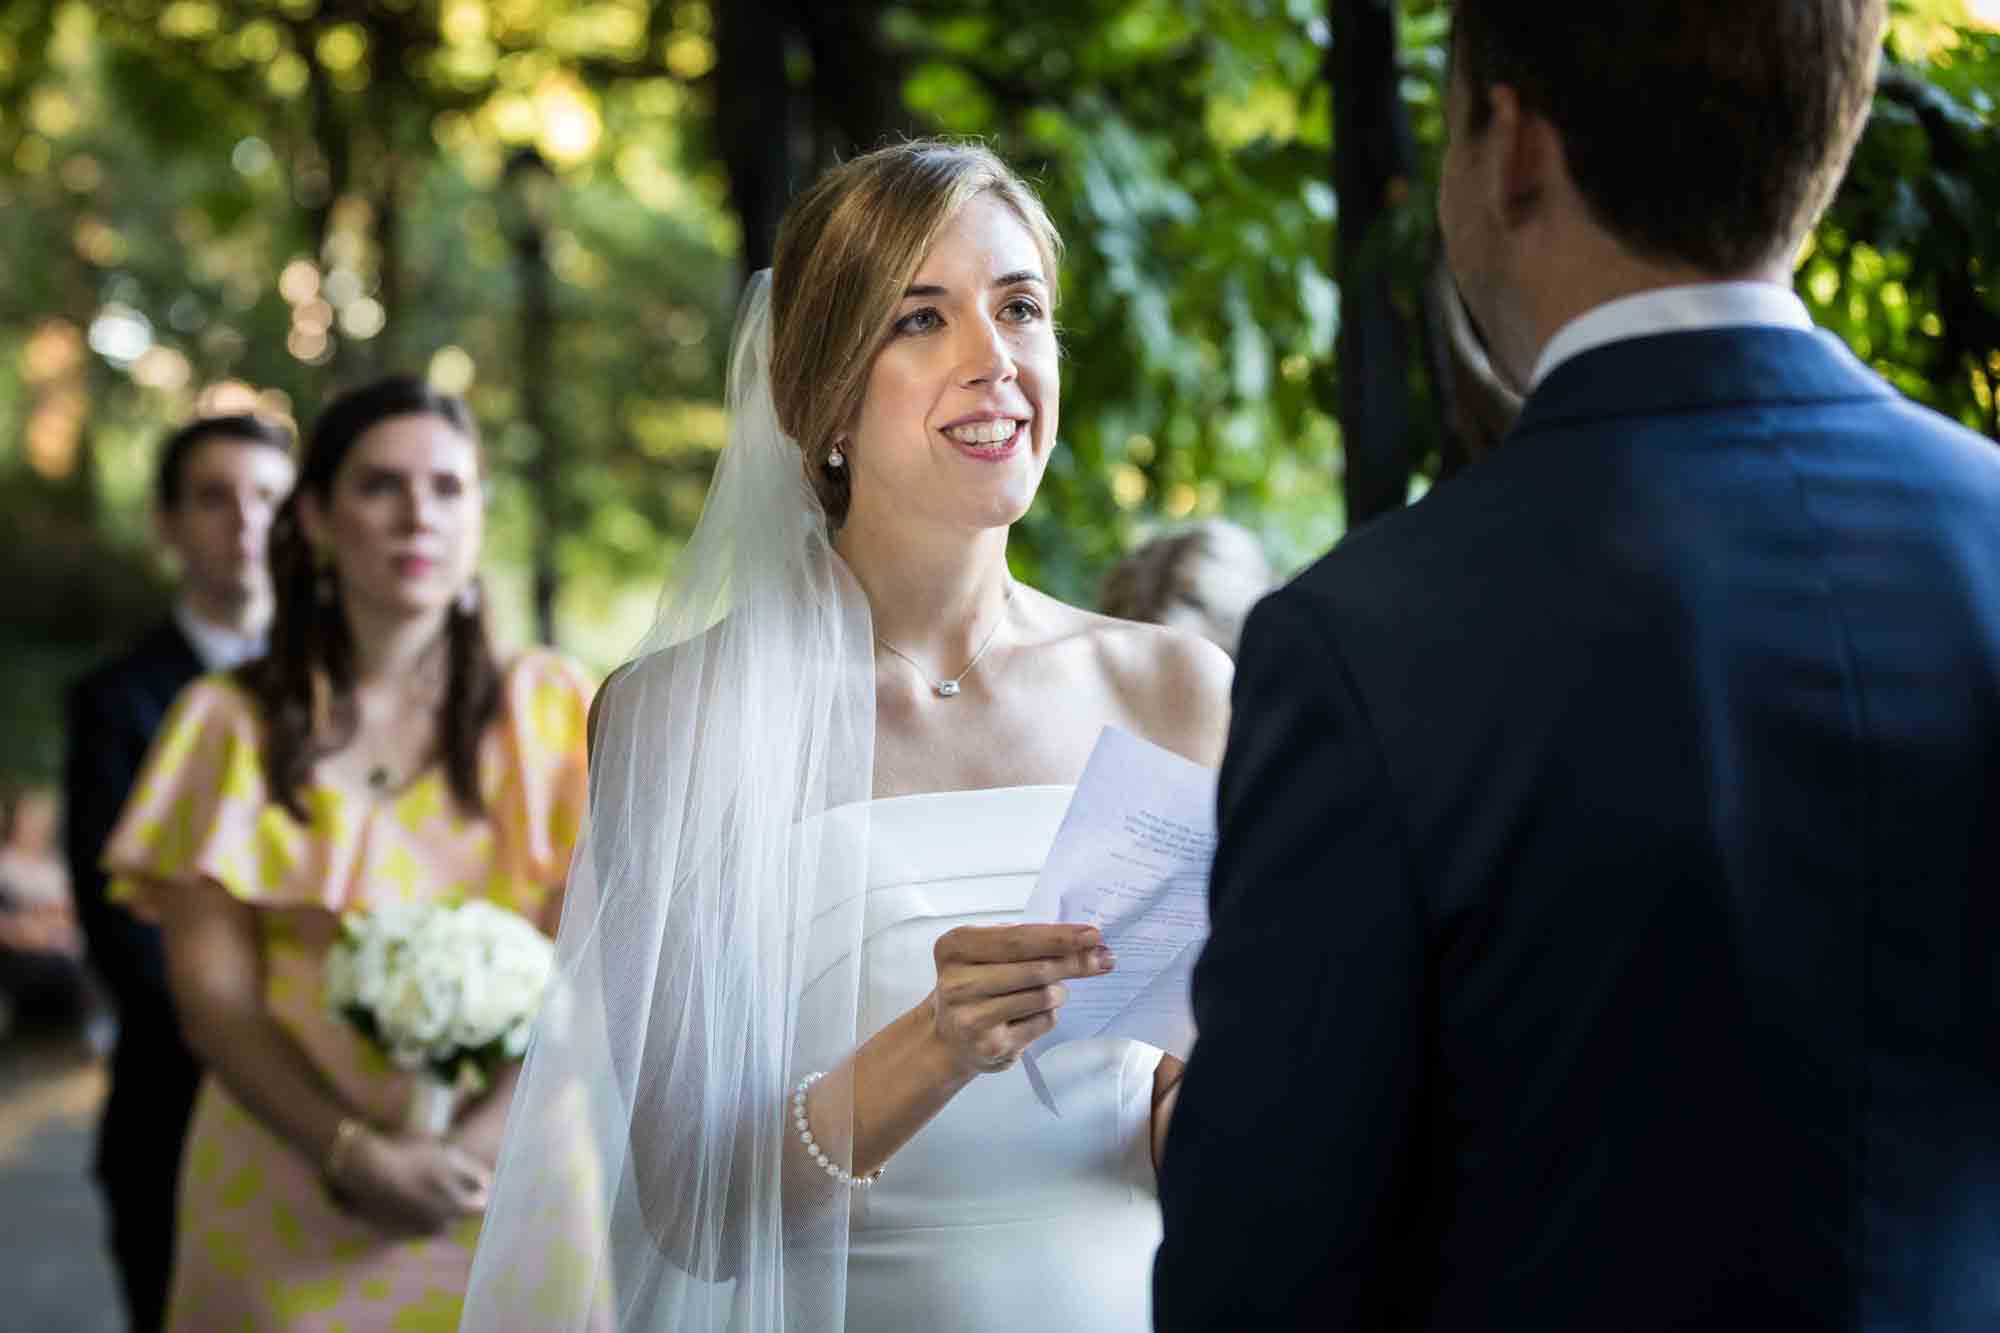 Bride holding paper and saying vows to groom during a Conservatory Garden wedding in Central Park